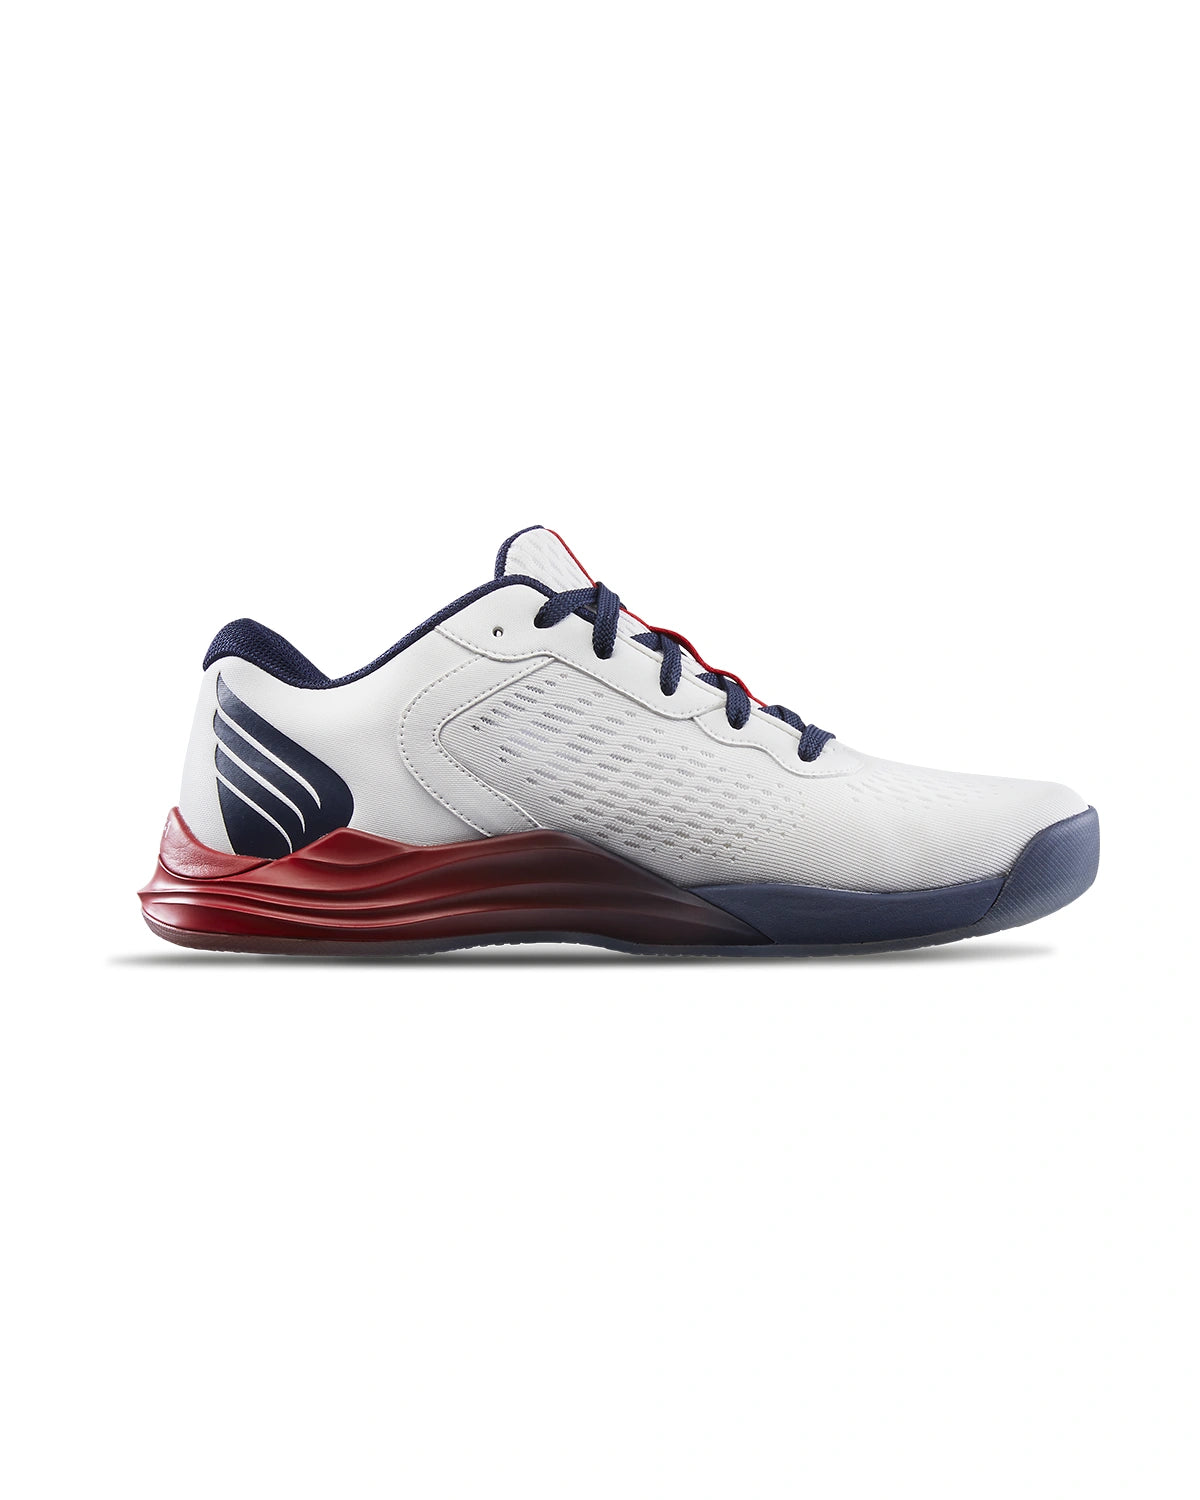 Chaussures - Tyr CX-T1 Trainer USA